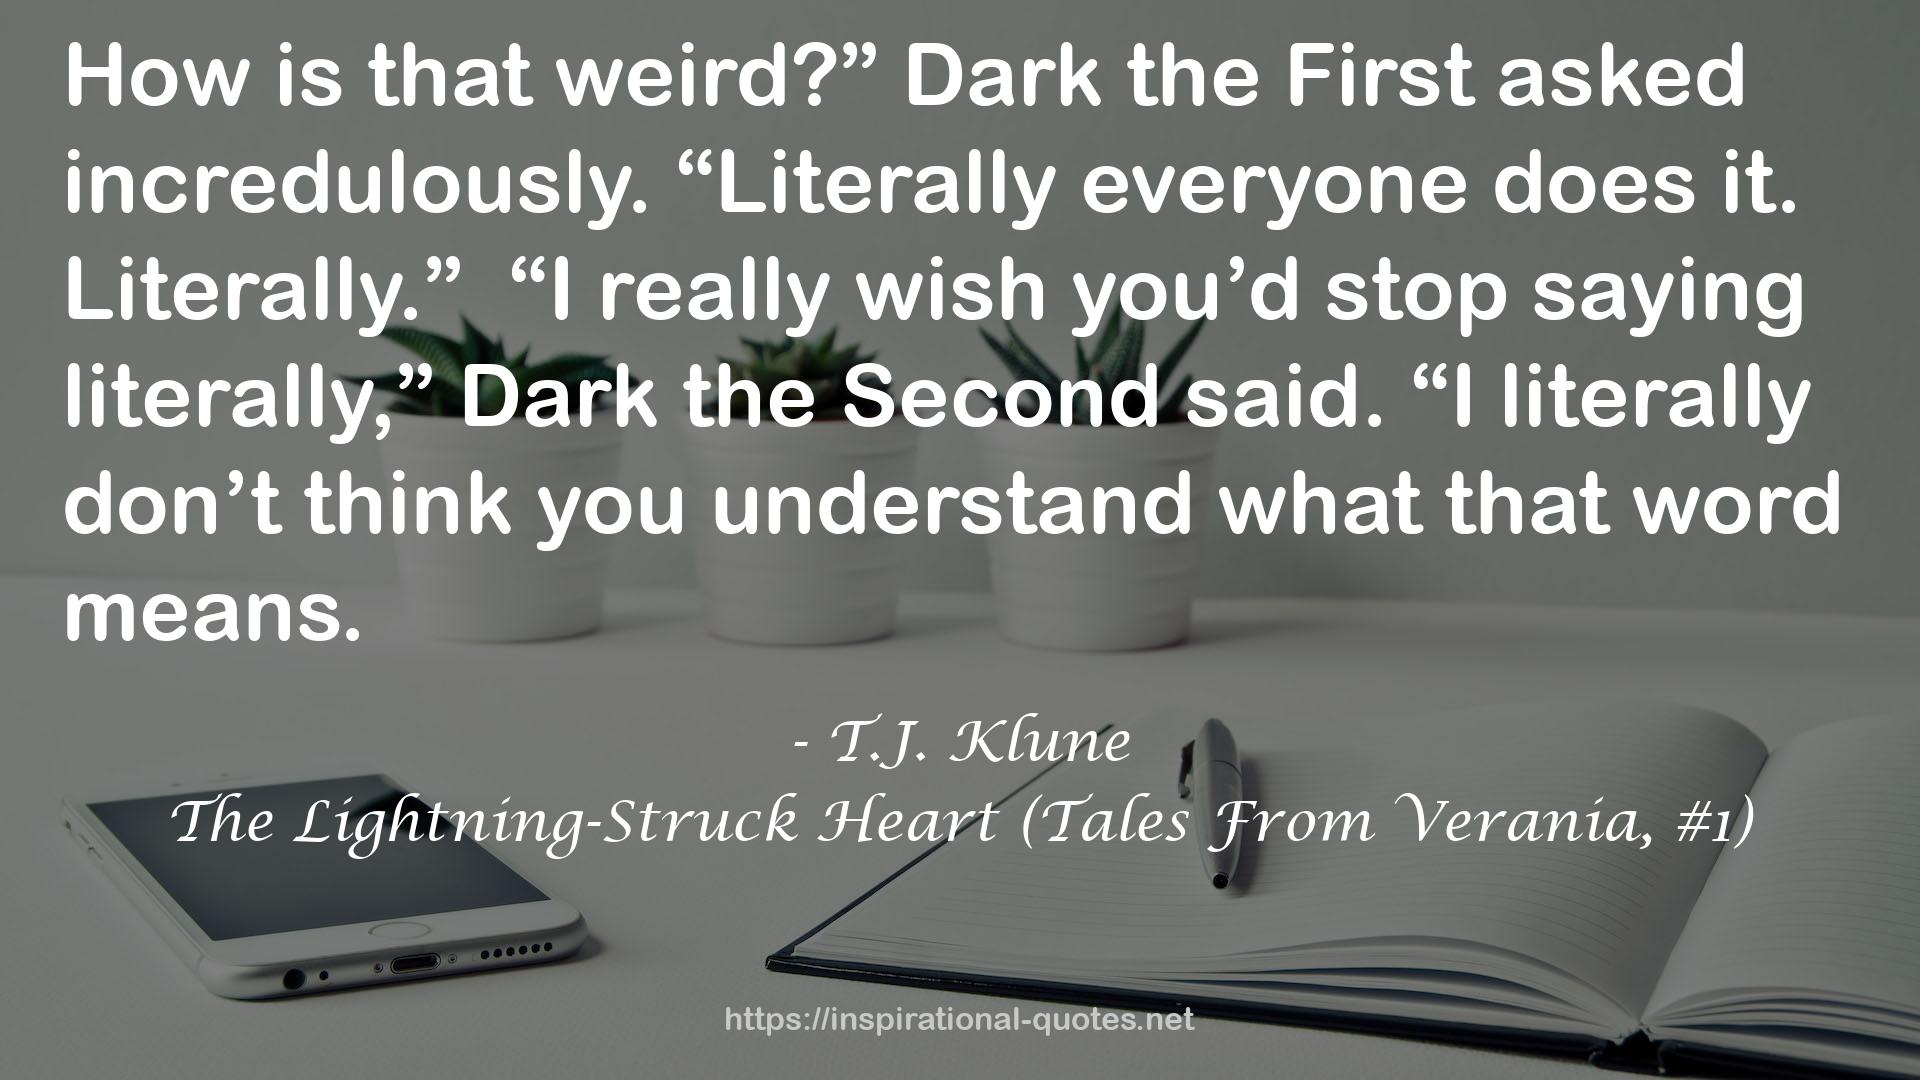 The Lightning-Struck Heart (Tales From Verania, #1) QUOTES